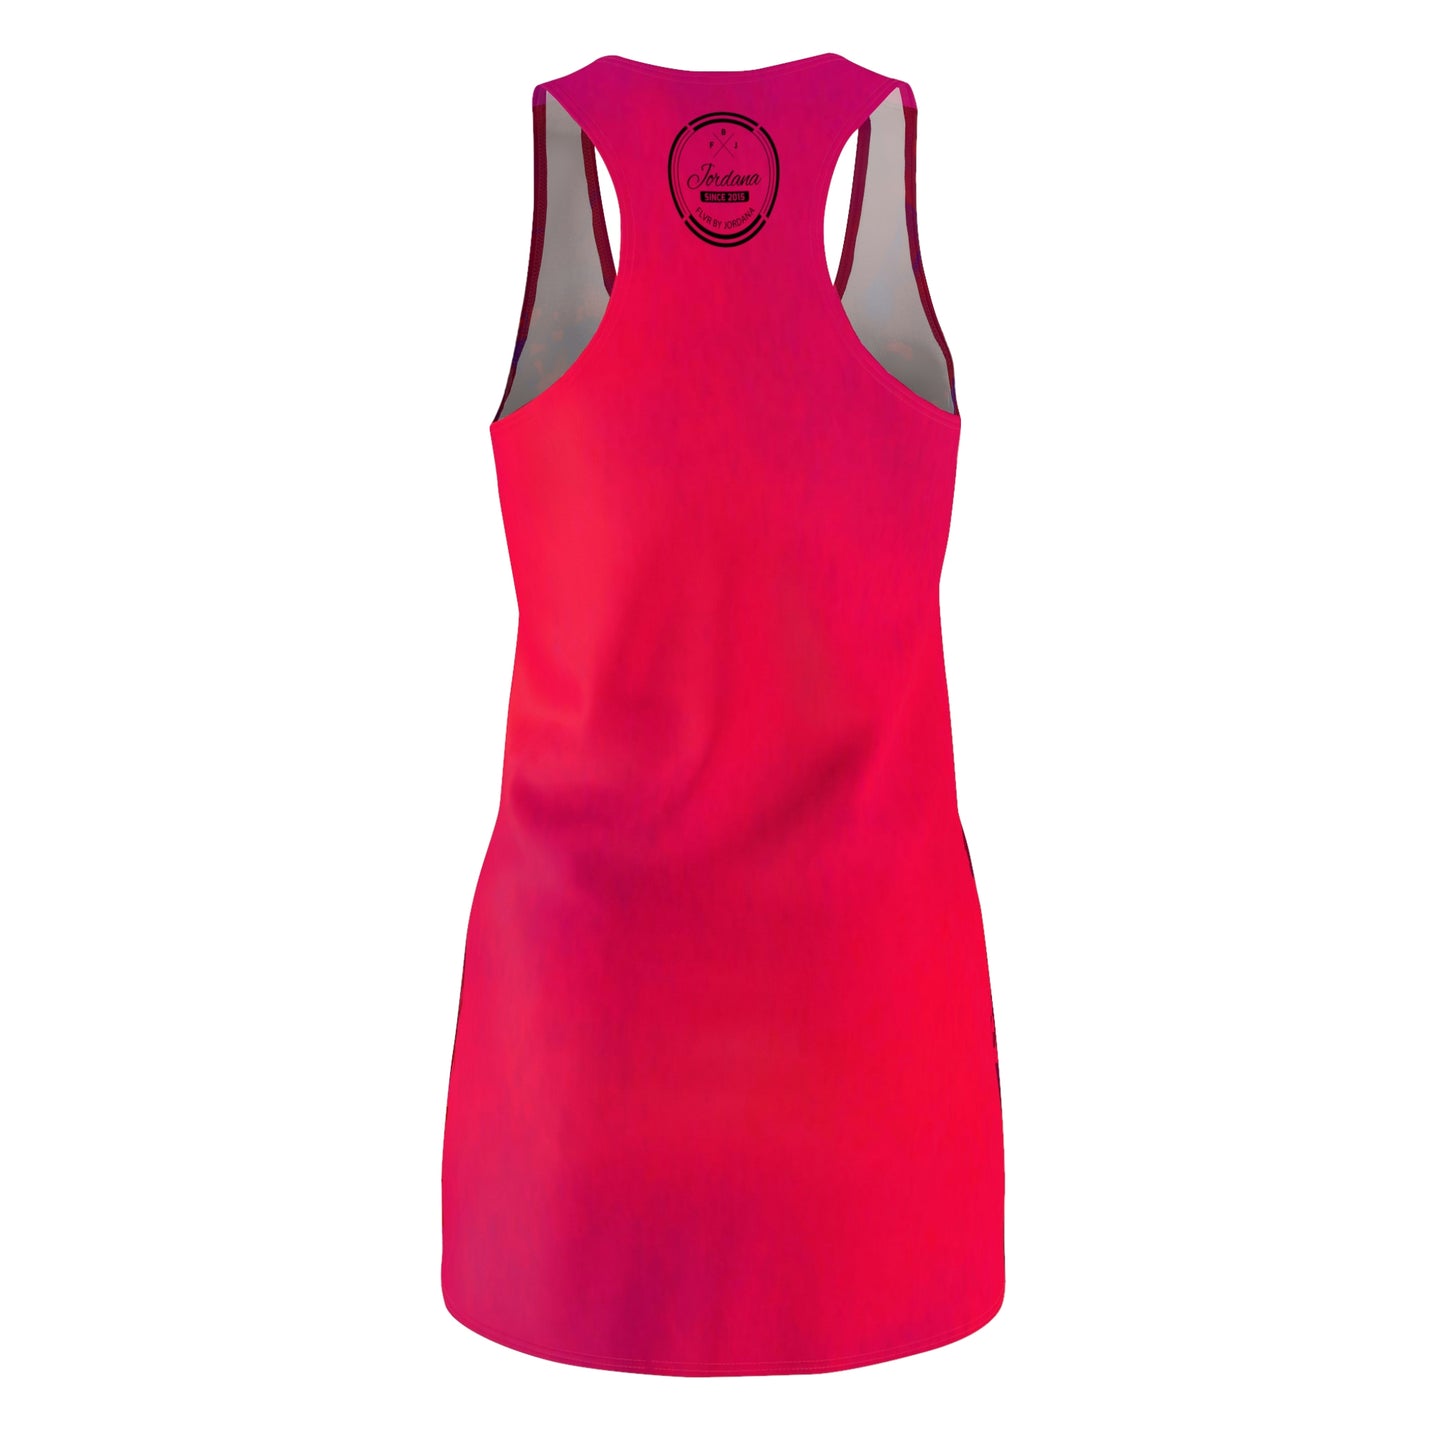 These Are The Times Women's Racerback Dress